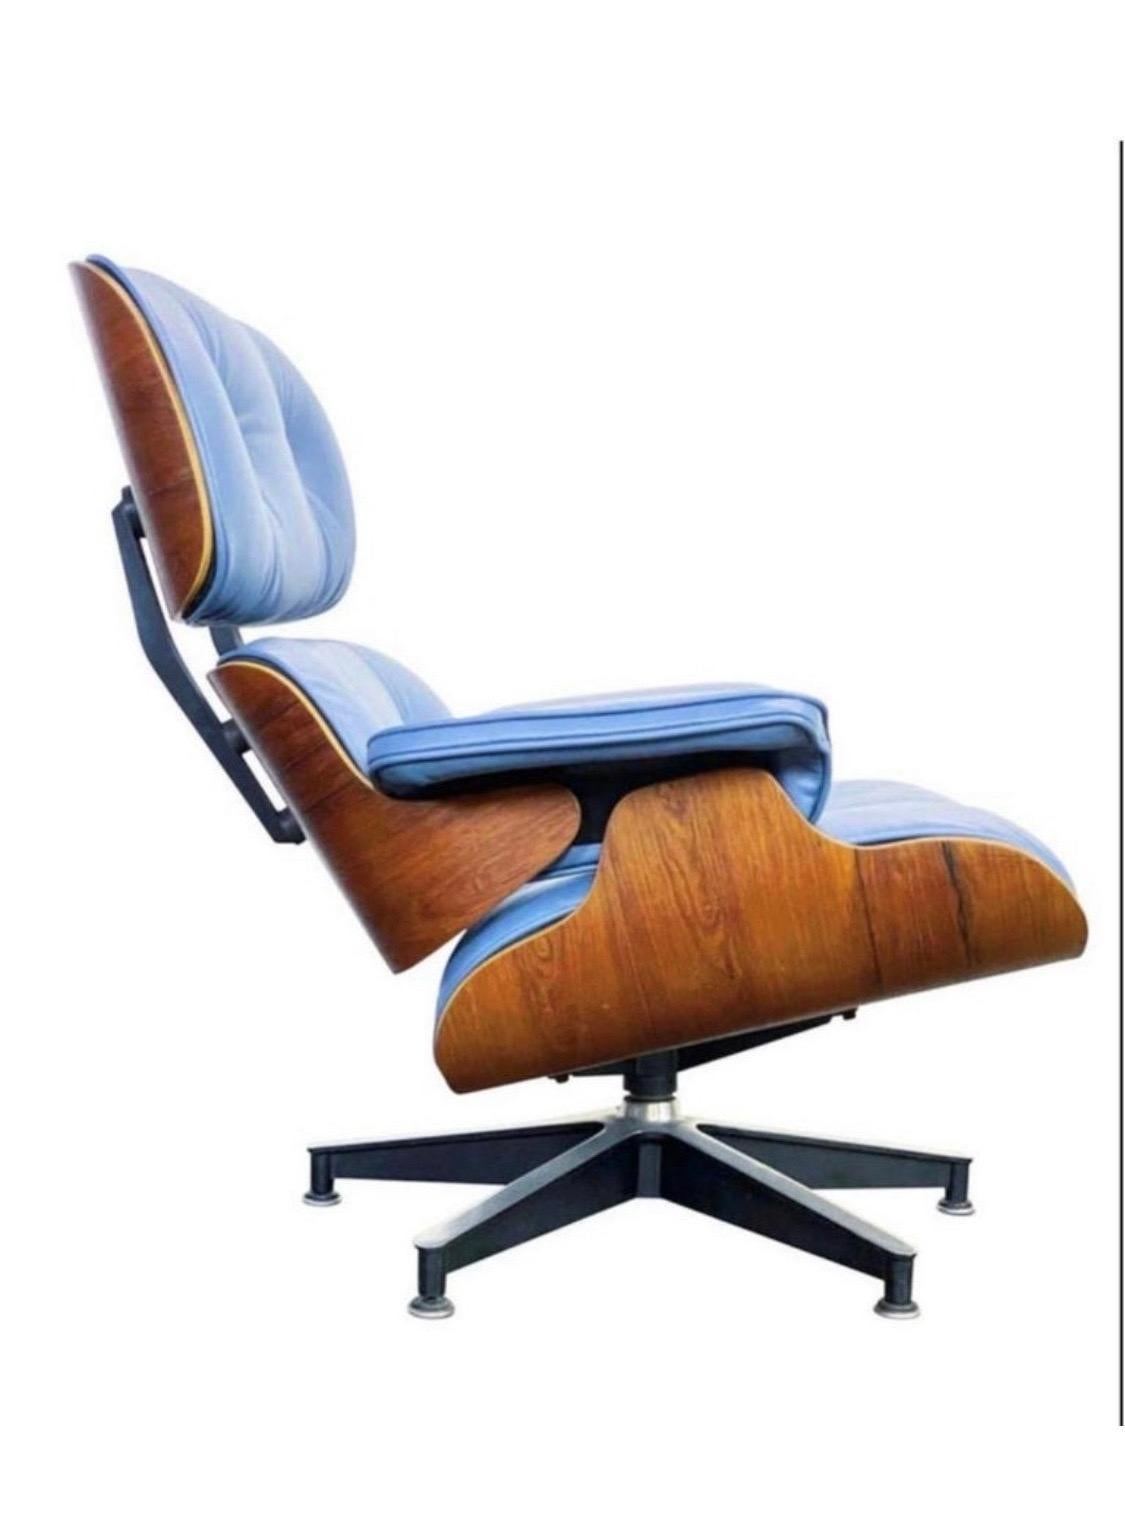 Restored Herman Miller Eames Lounge Chair with Custom Blue Leather For Sale 1